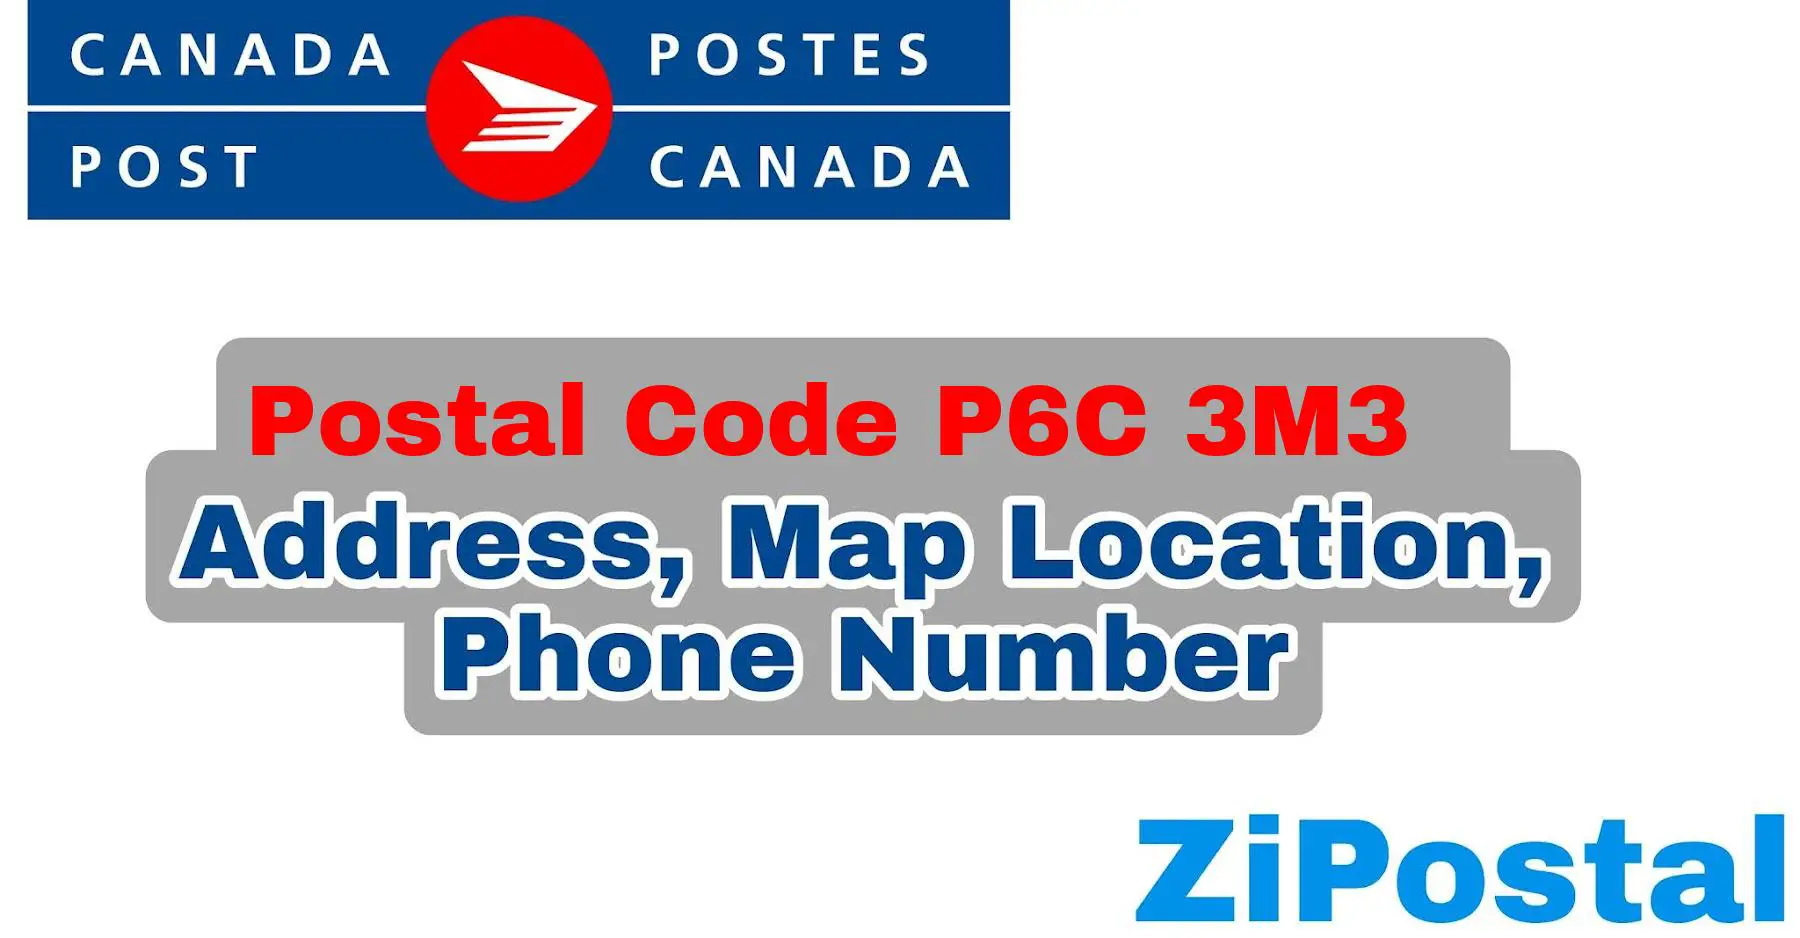 Postal Code P6C 3M3 Address Map Location and Phone Number